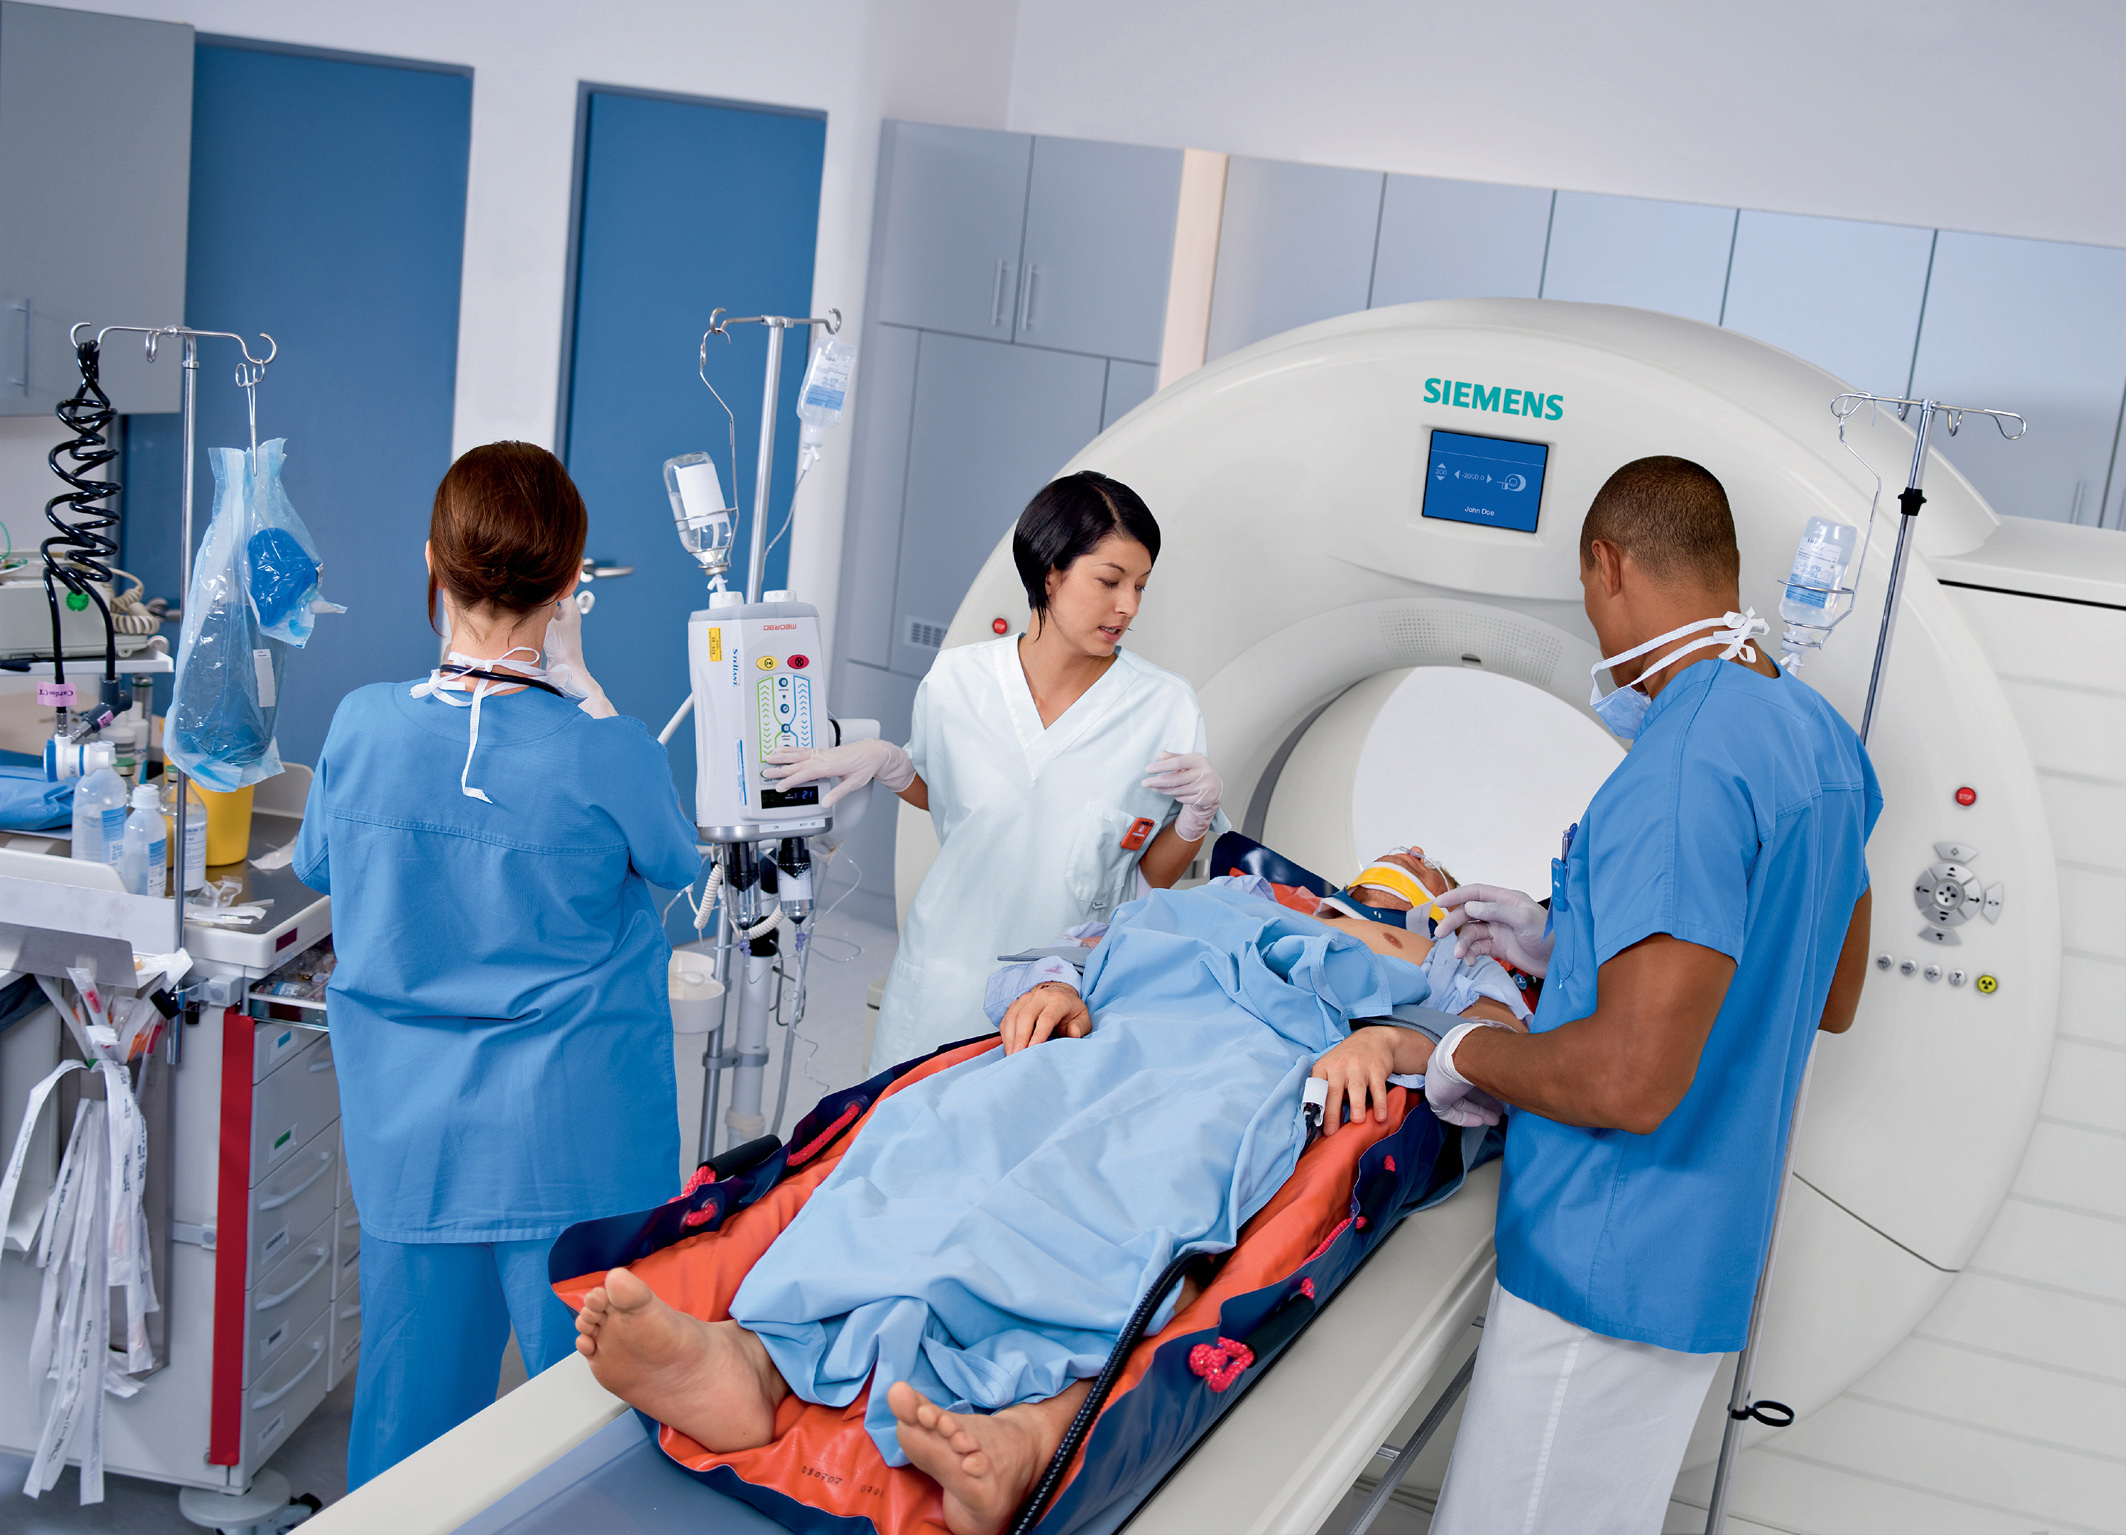 Millions are treated with nuclear imaging and medicine.